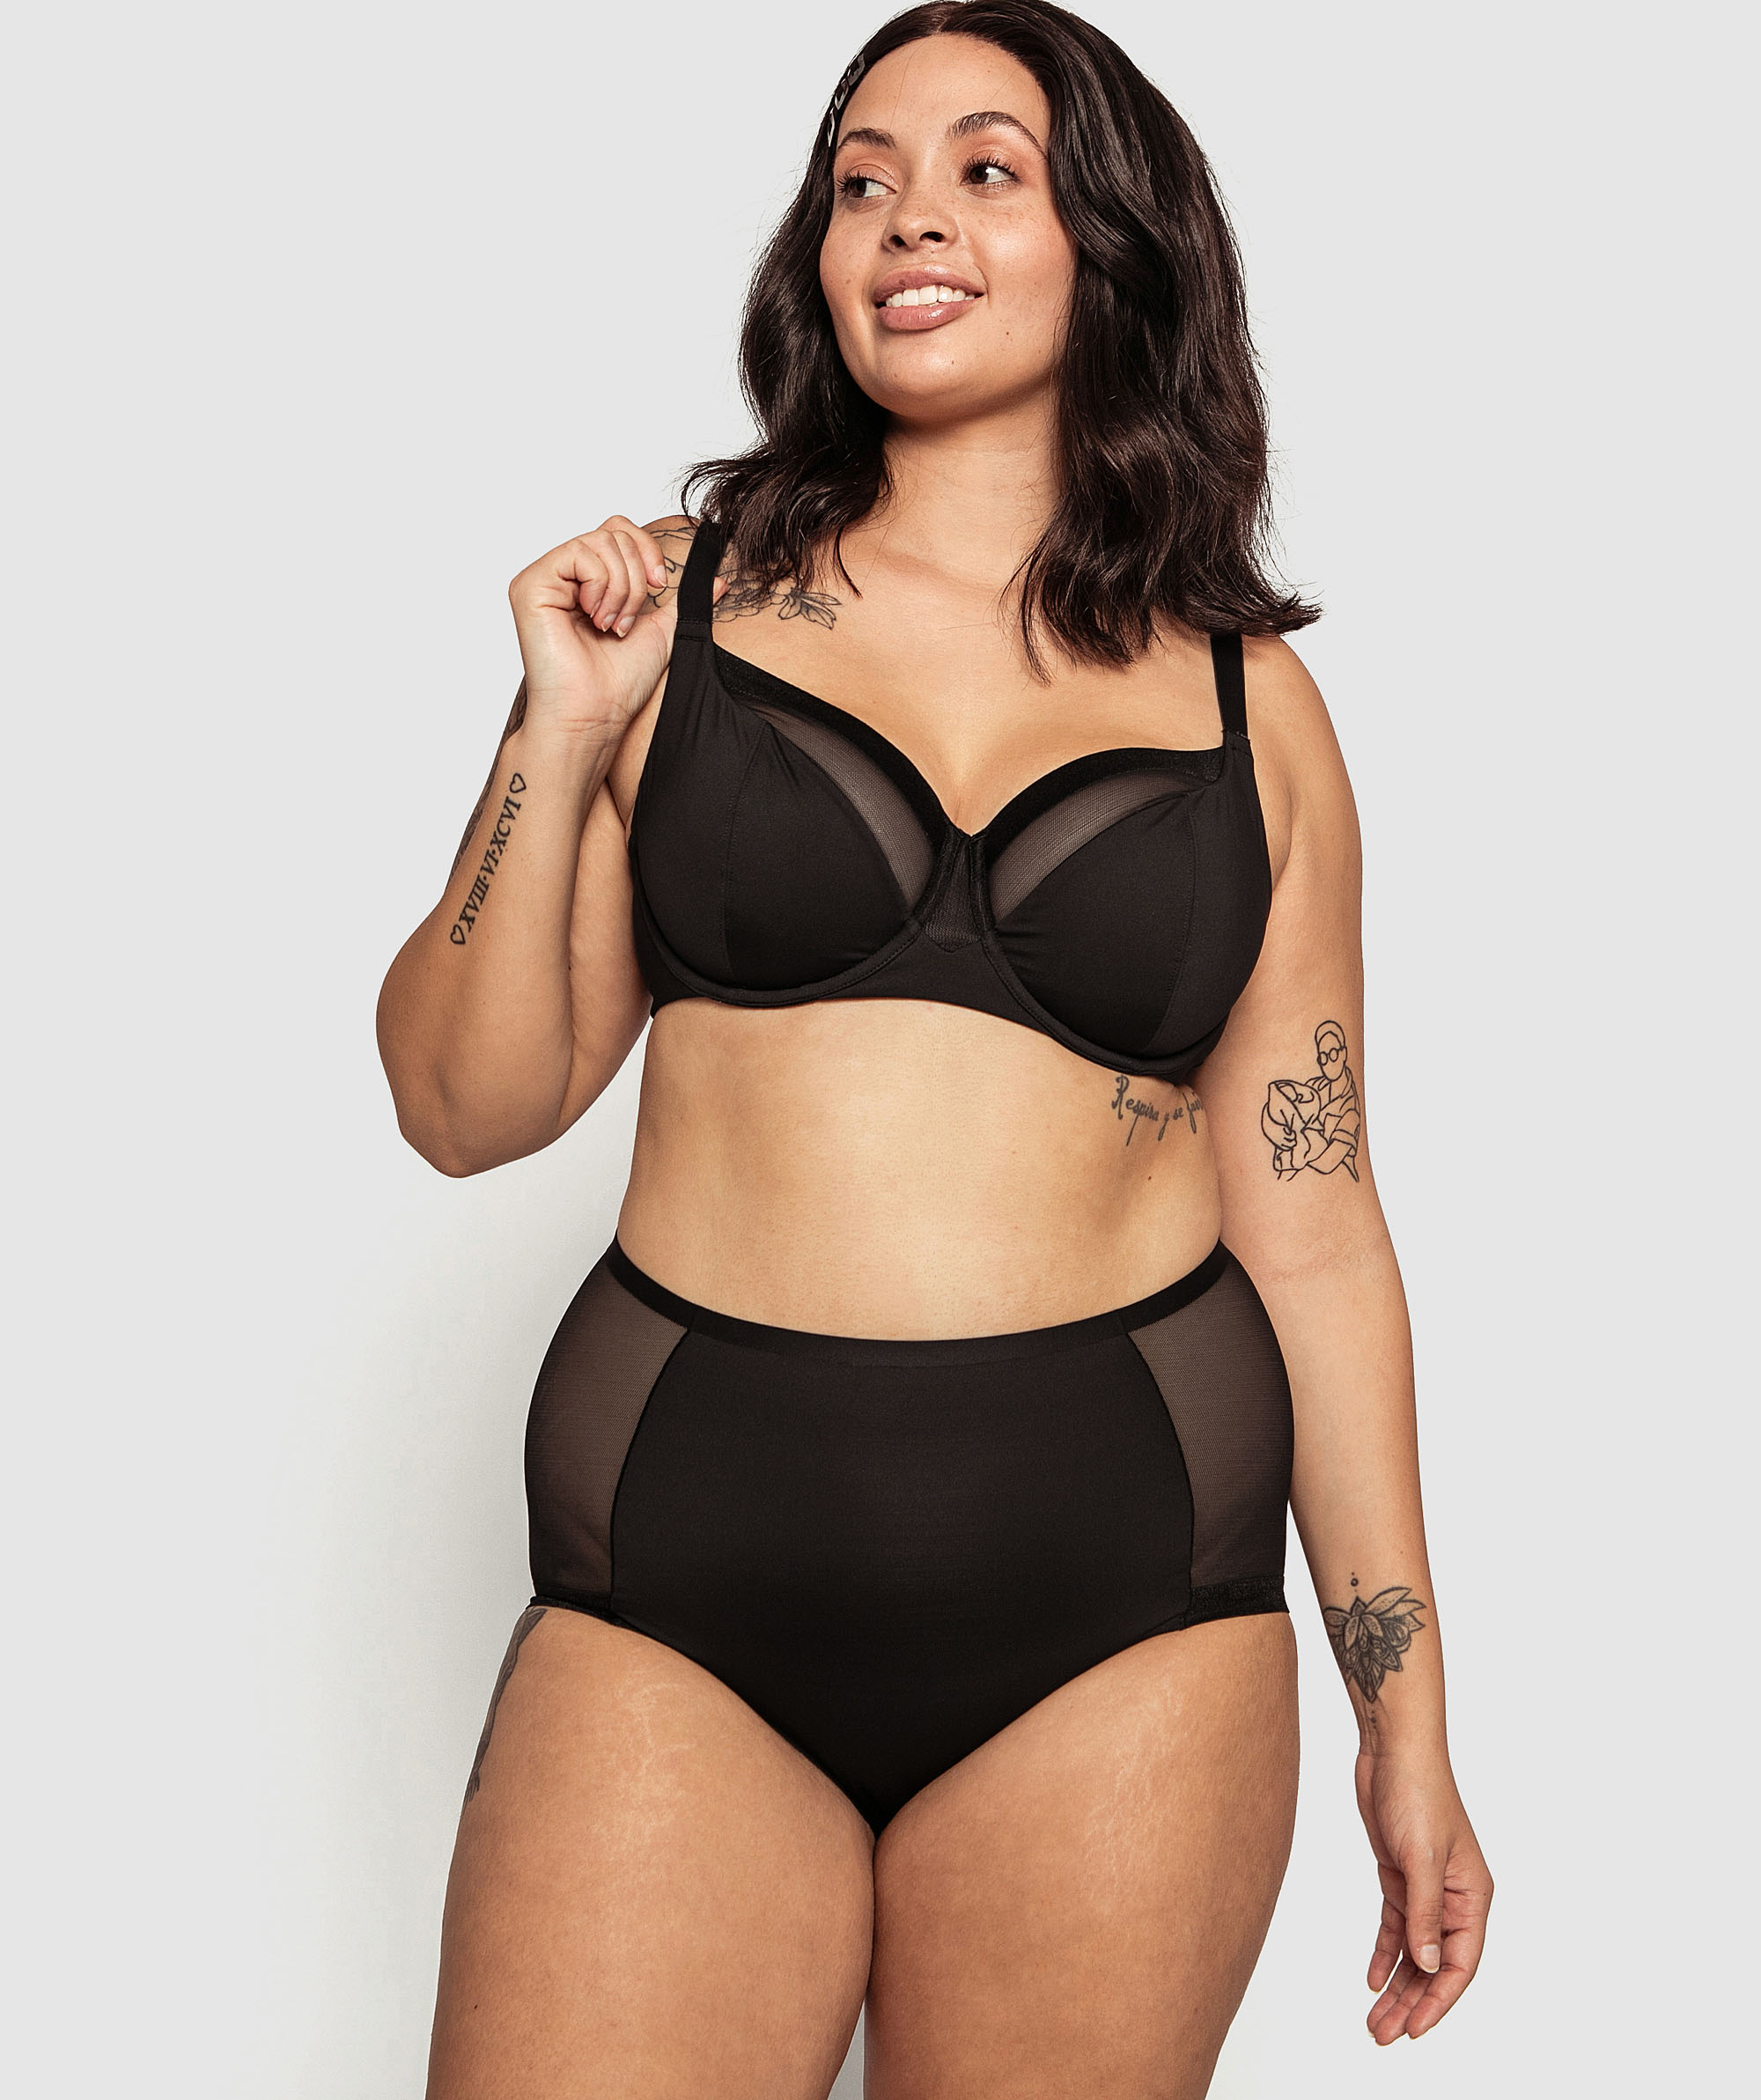 My Every Day Full Cup Underwire Bra - Black